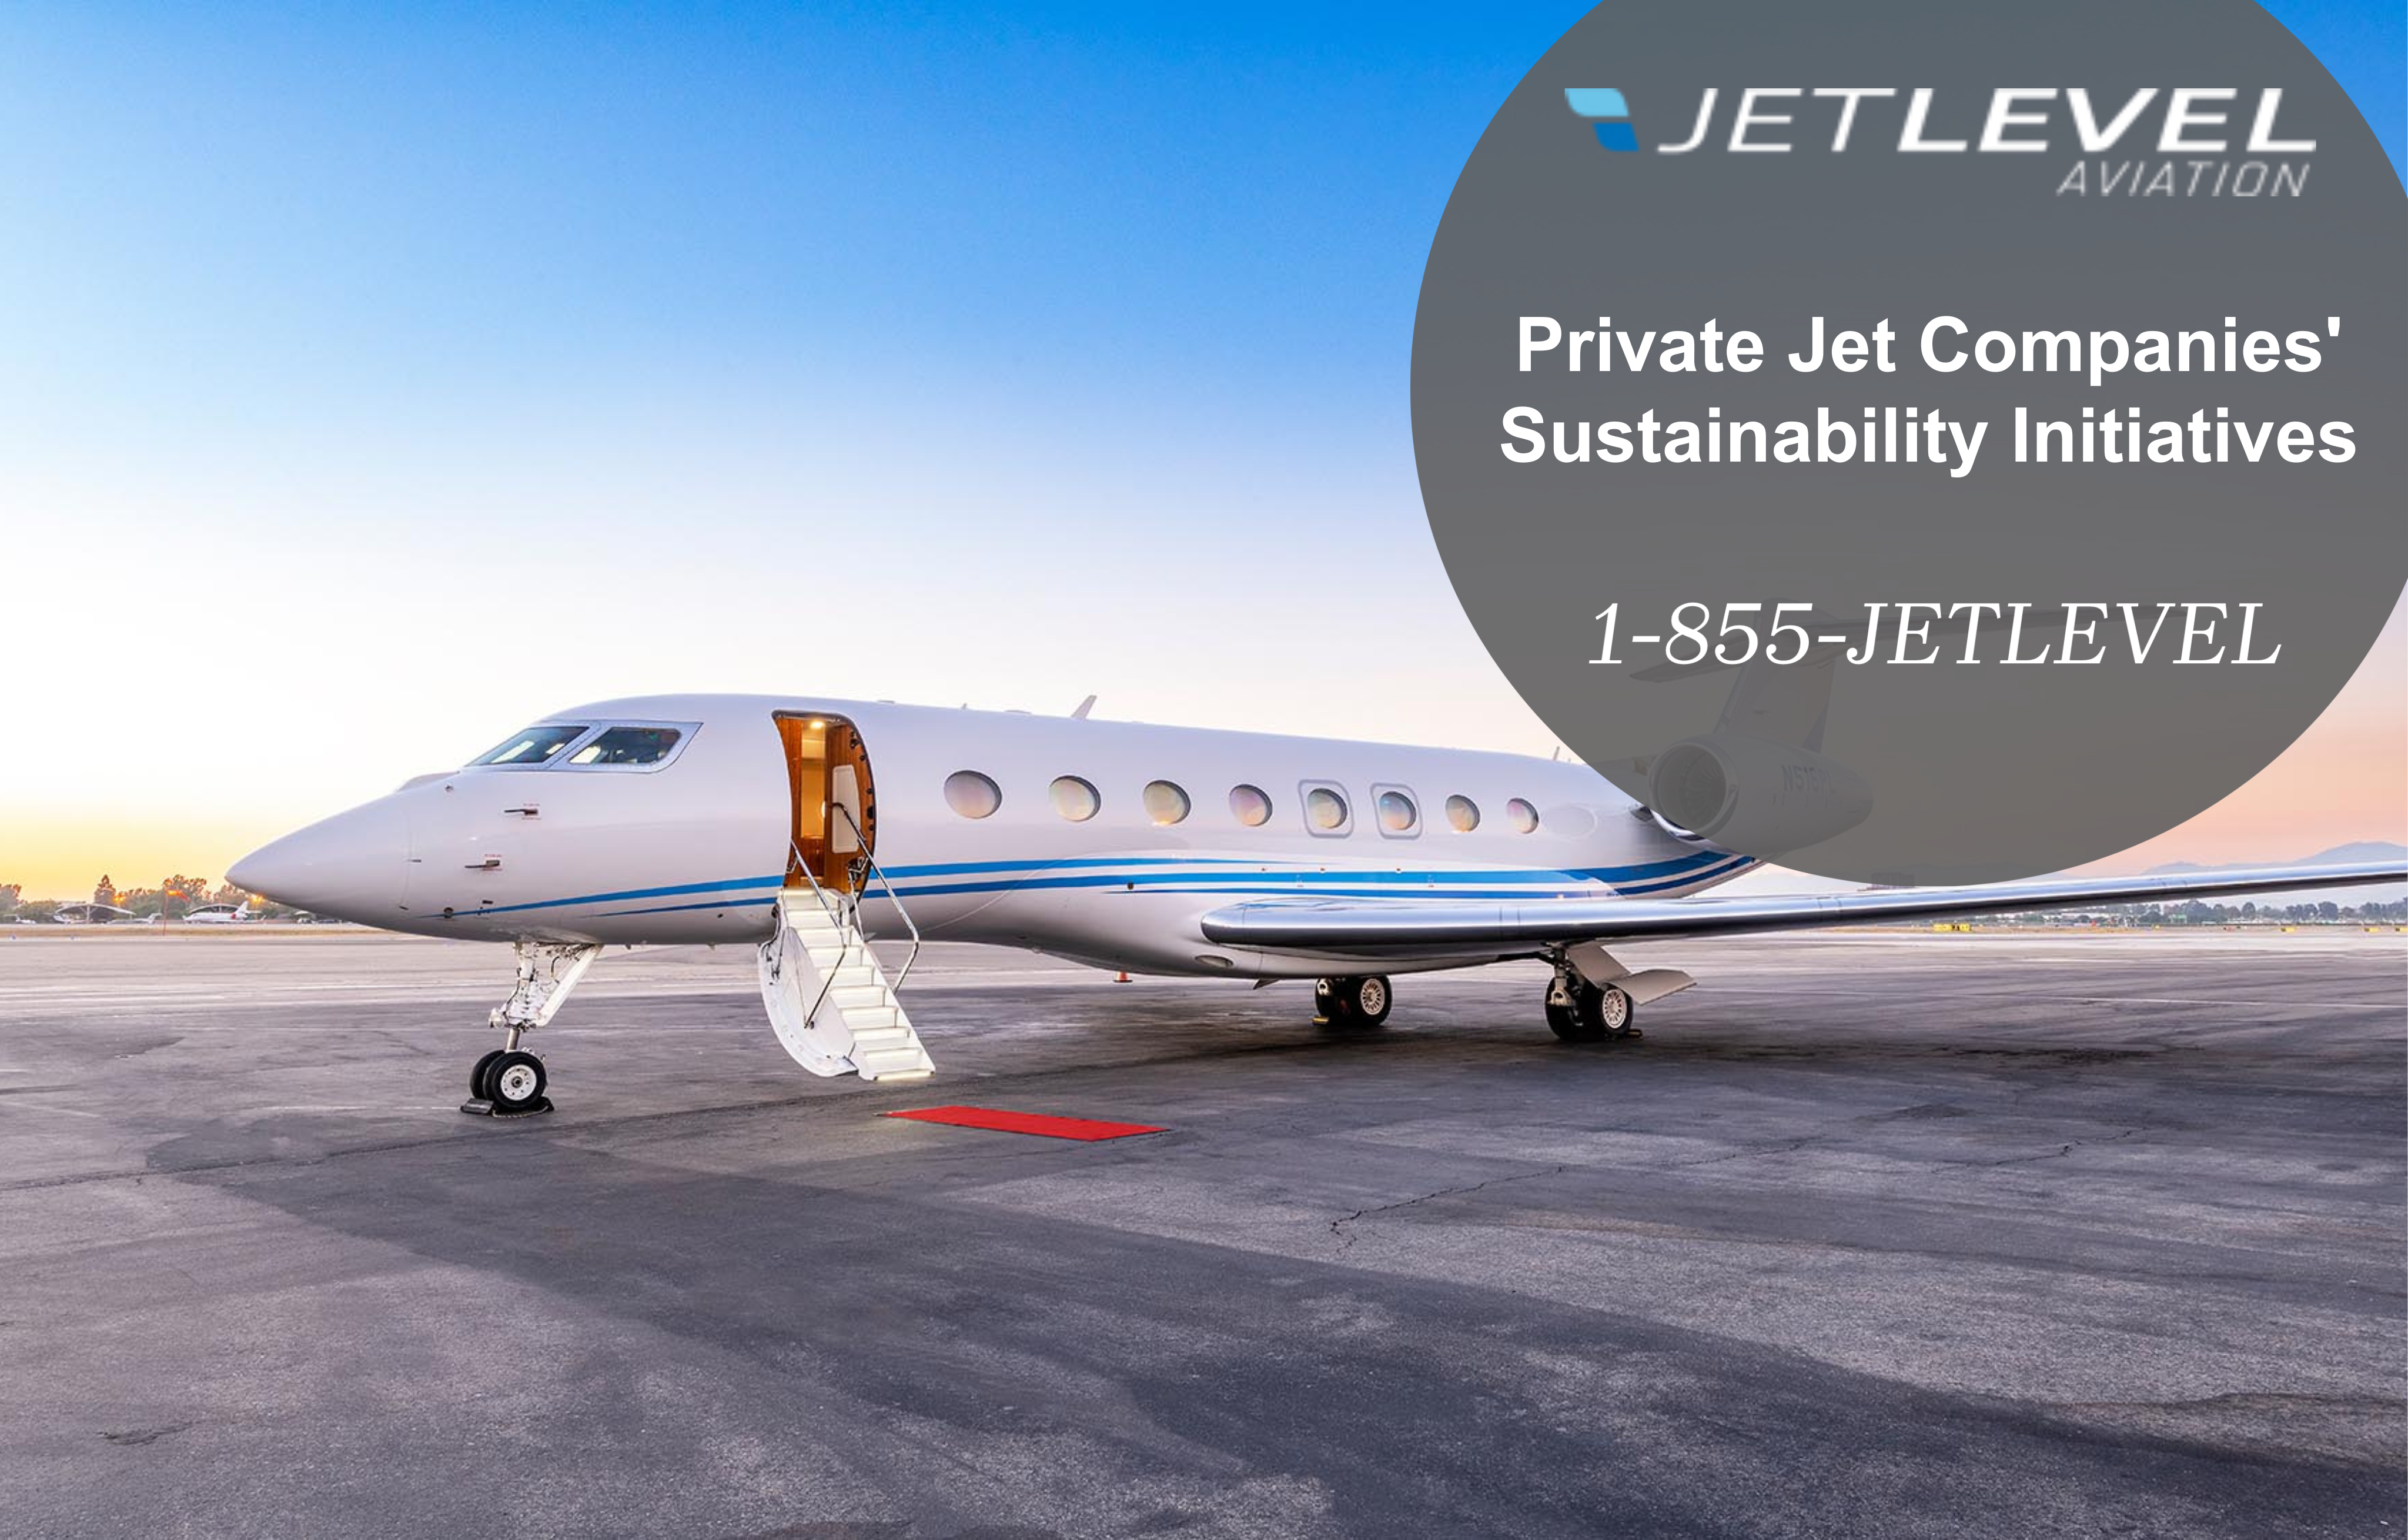 Private Jet Companies' Sustainability Initiatives